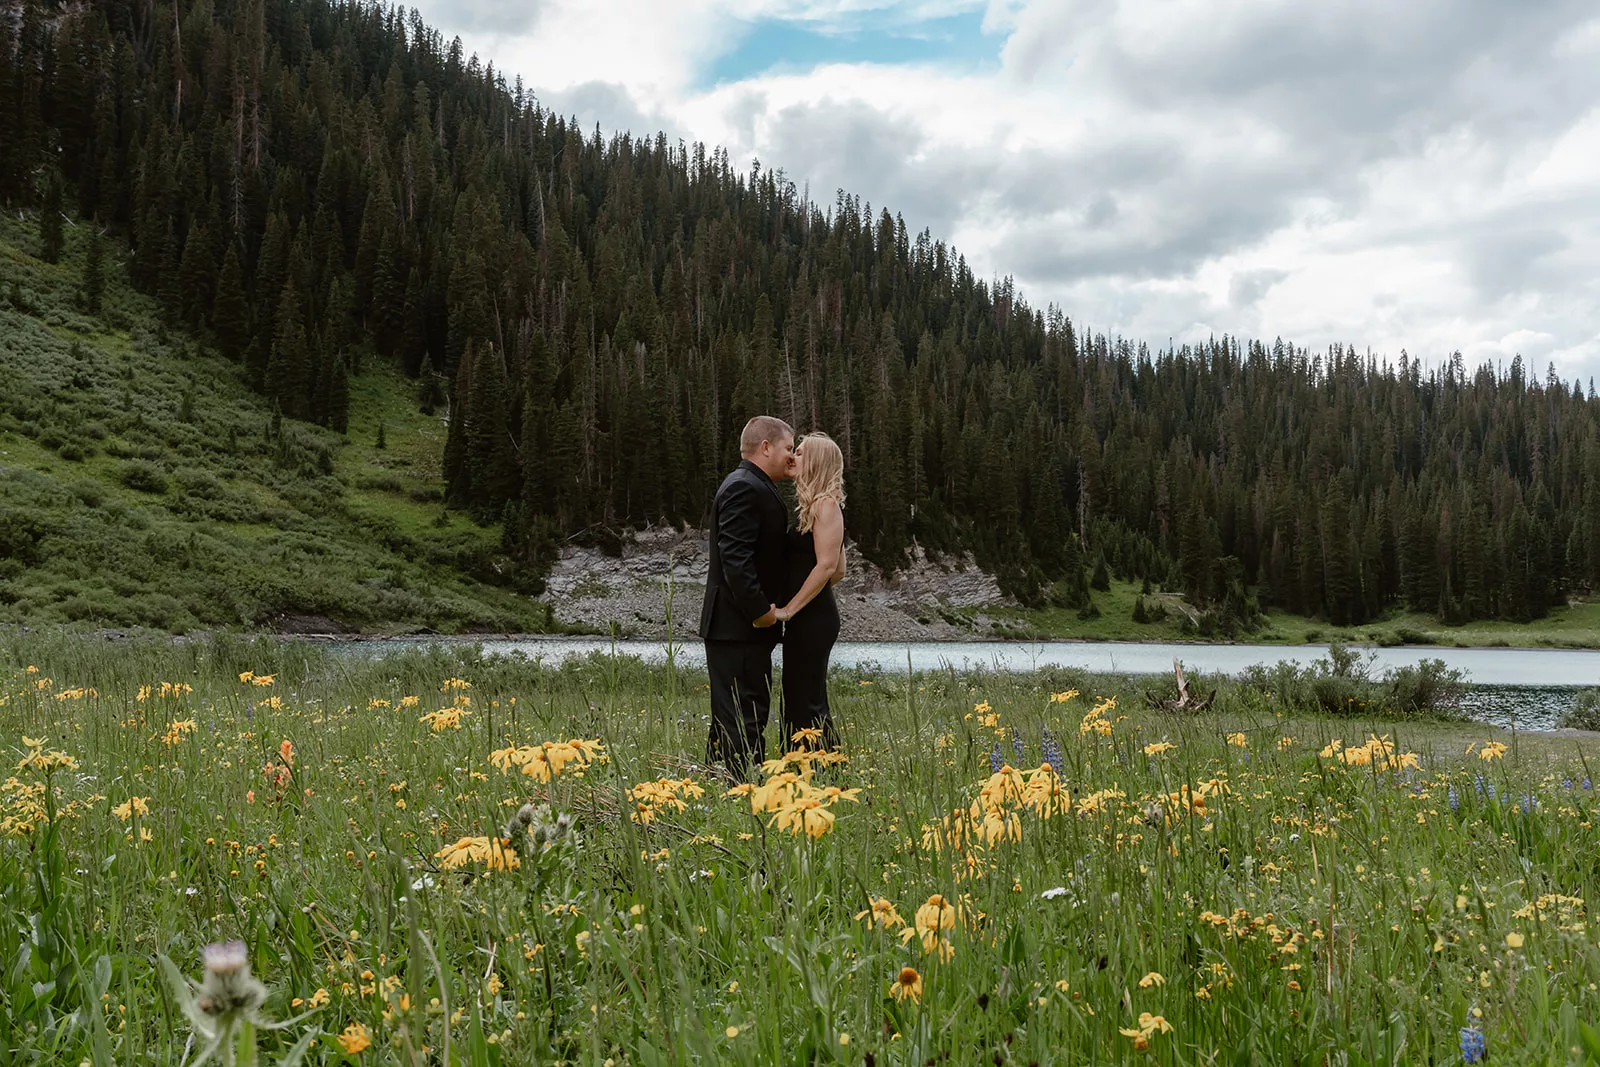 A couple gets married in non-traditional black attire in Colorado.